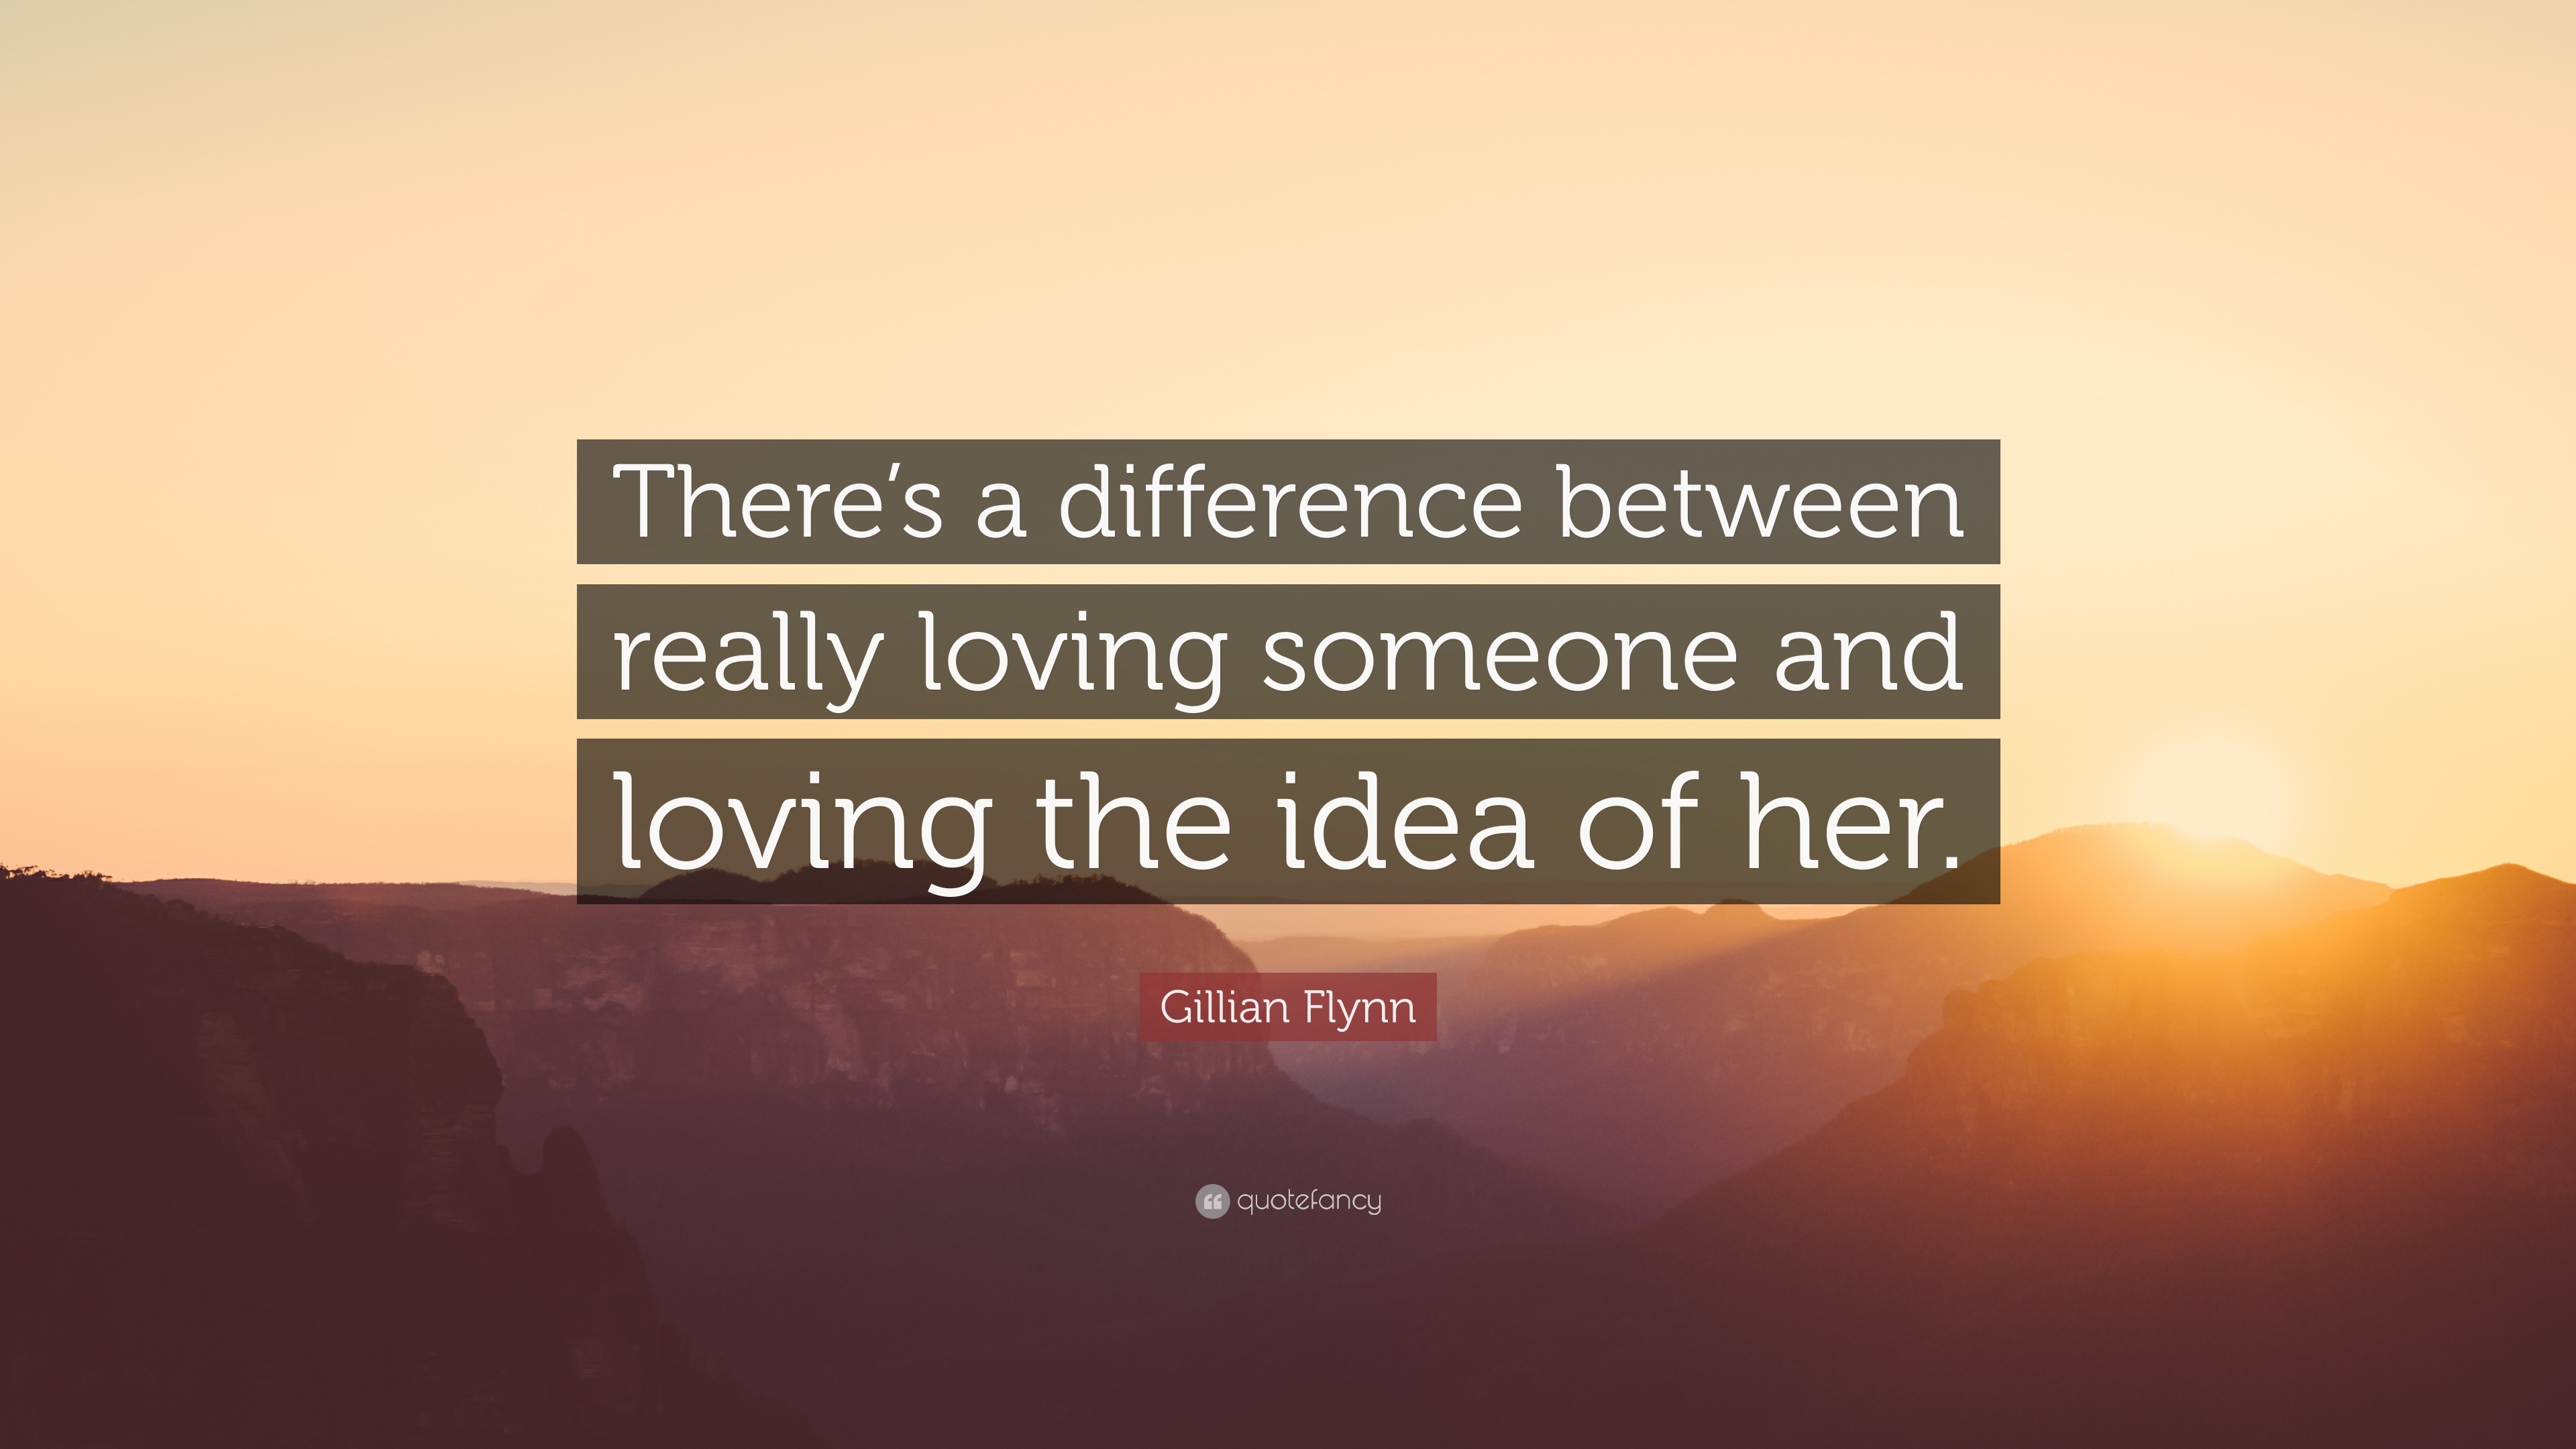 Gillian Flynn Quote “There s a difference between really loving someone and loving the idea